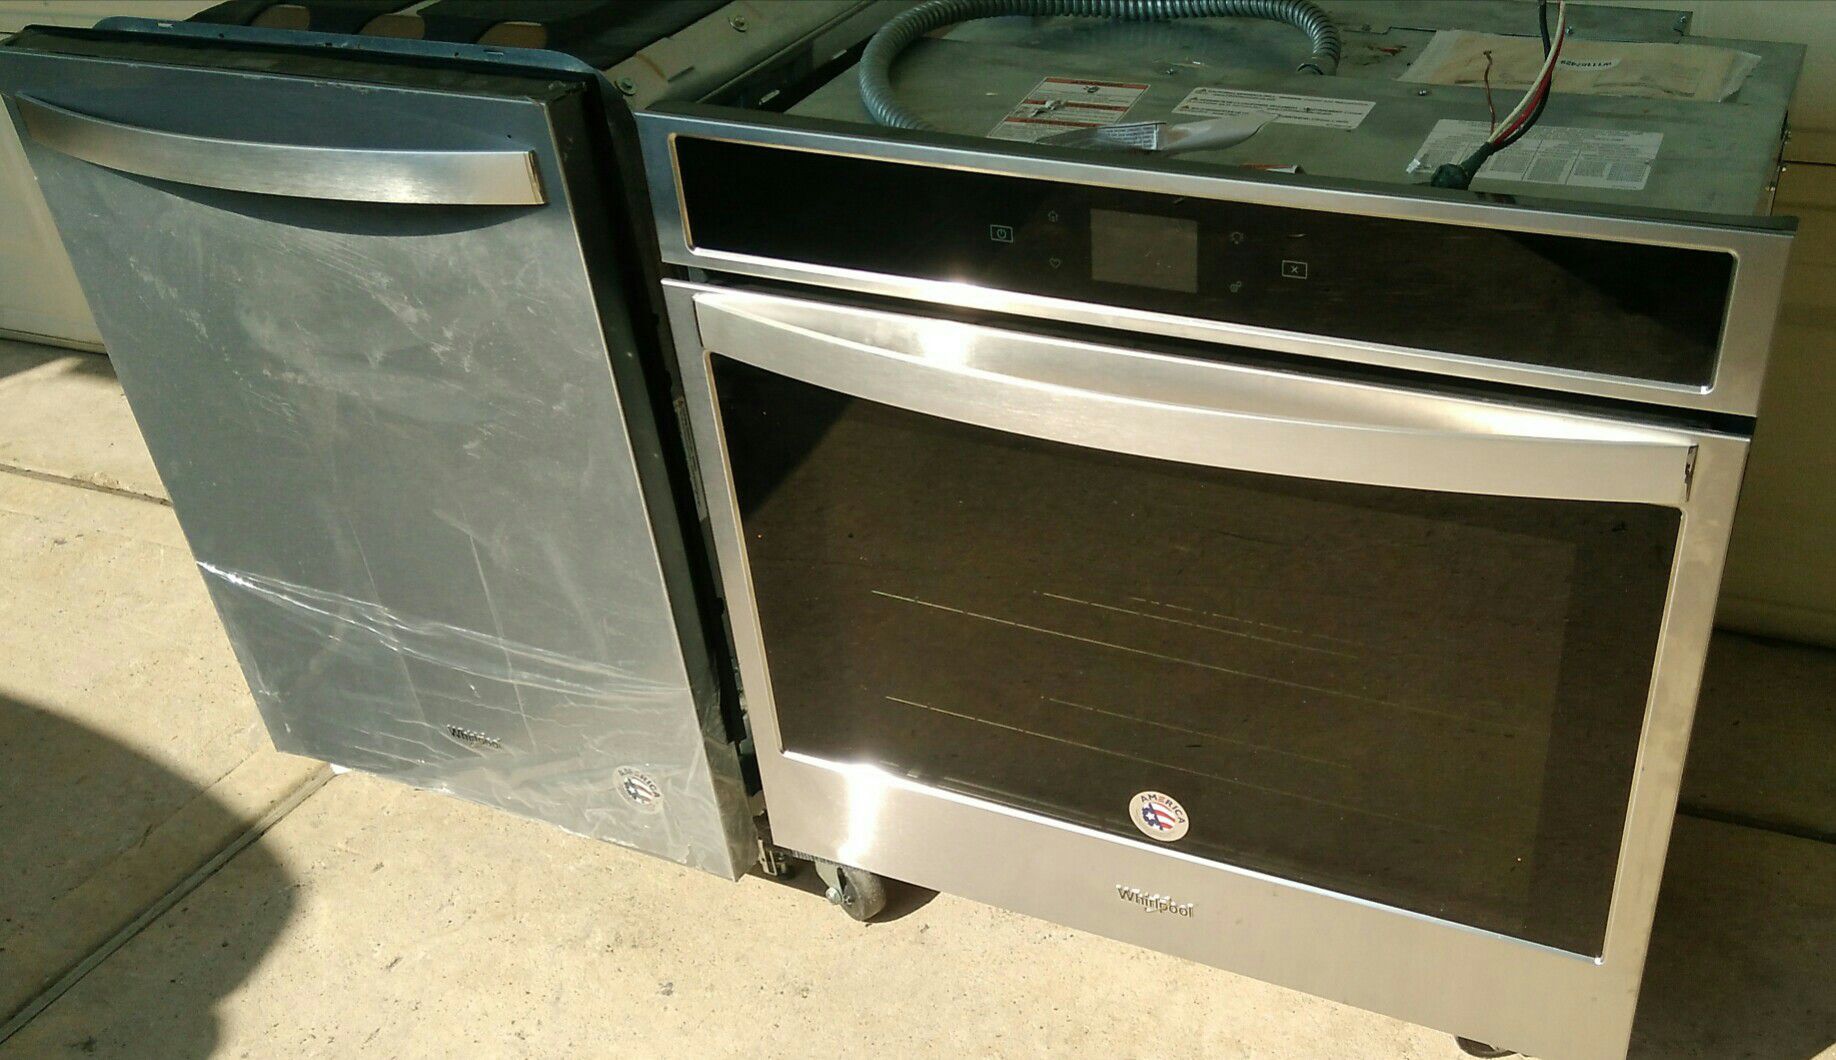 MATCHING STAINLESS WHIRLPOOL SINGLE WALL OVEN, DISHWASHER WITH 3rd RACK